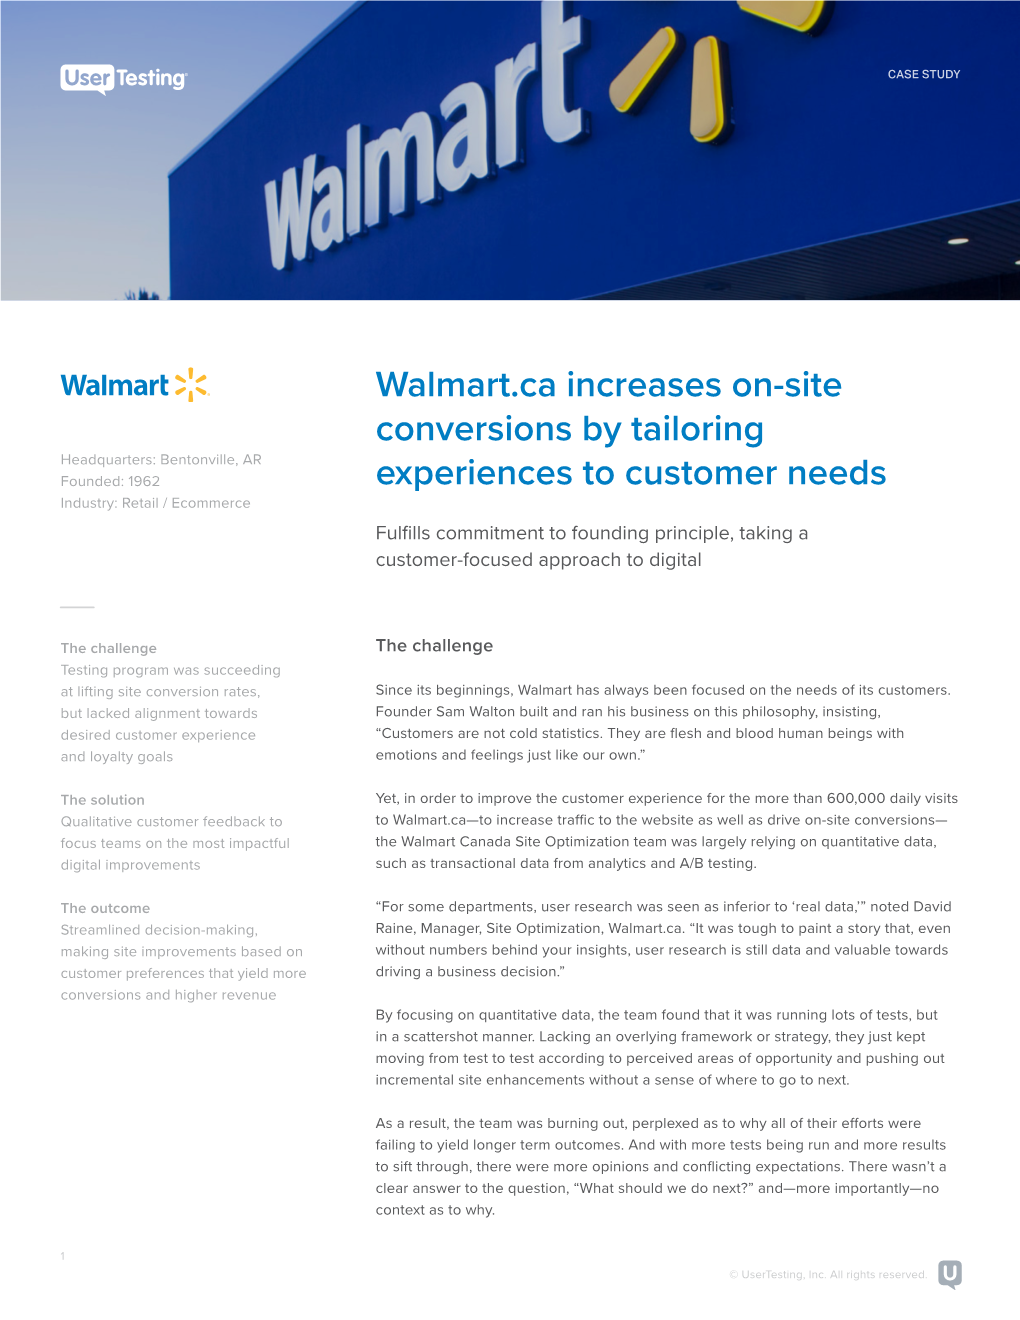 Walmart Canada Site Optimization Team Was Largely Relying on Quantitative Data, Digital Improvements Such As Transactional Data from Analytics and A/B Testing